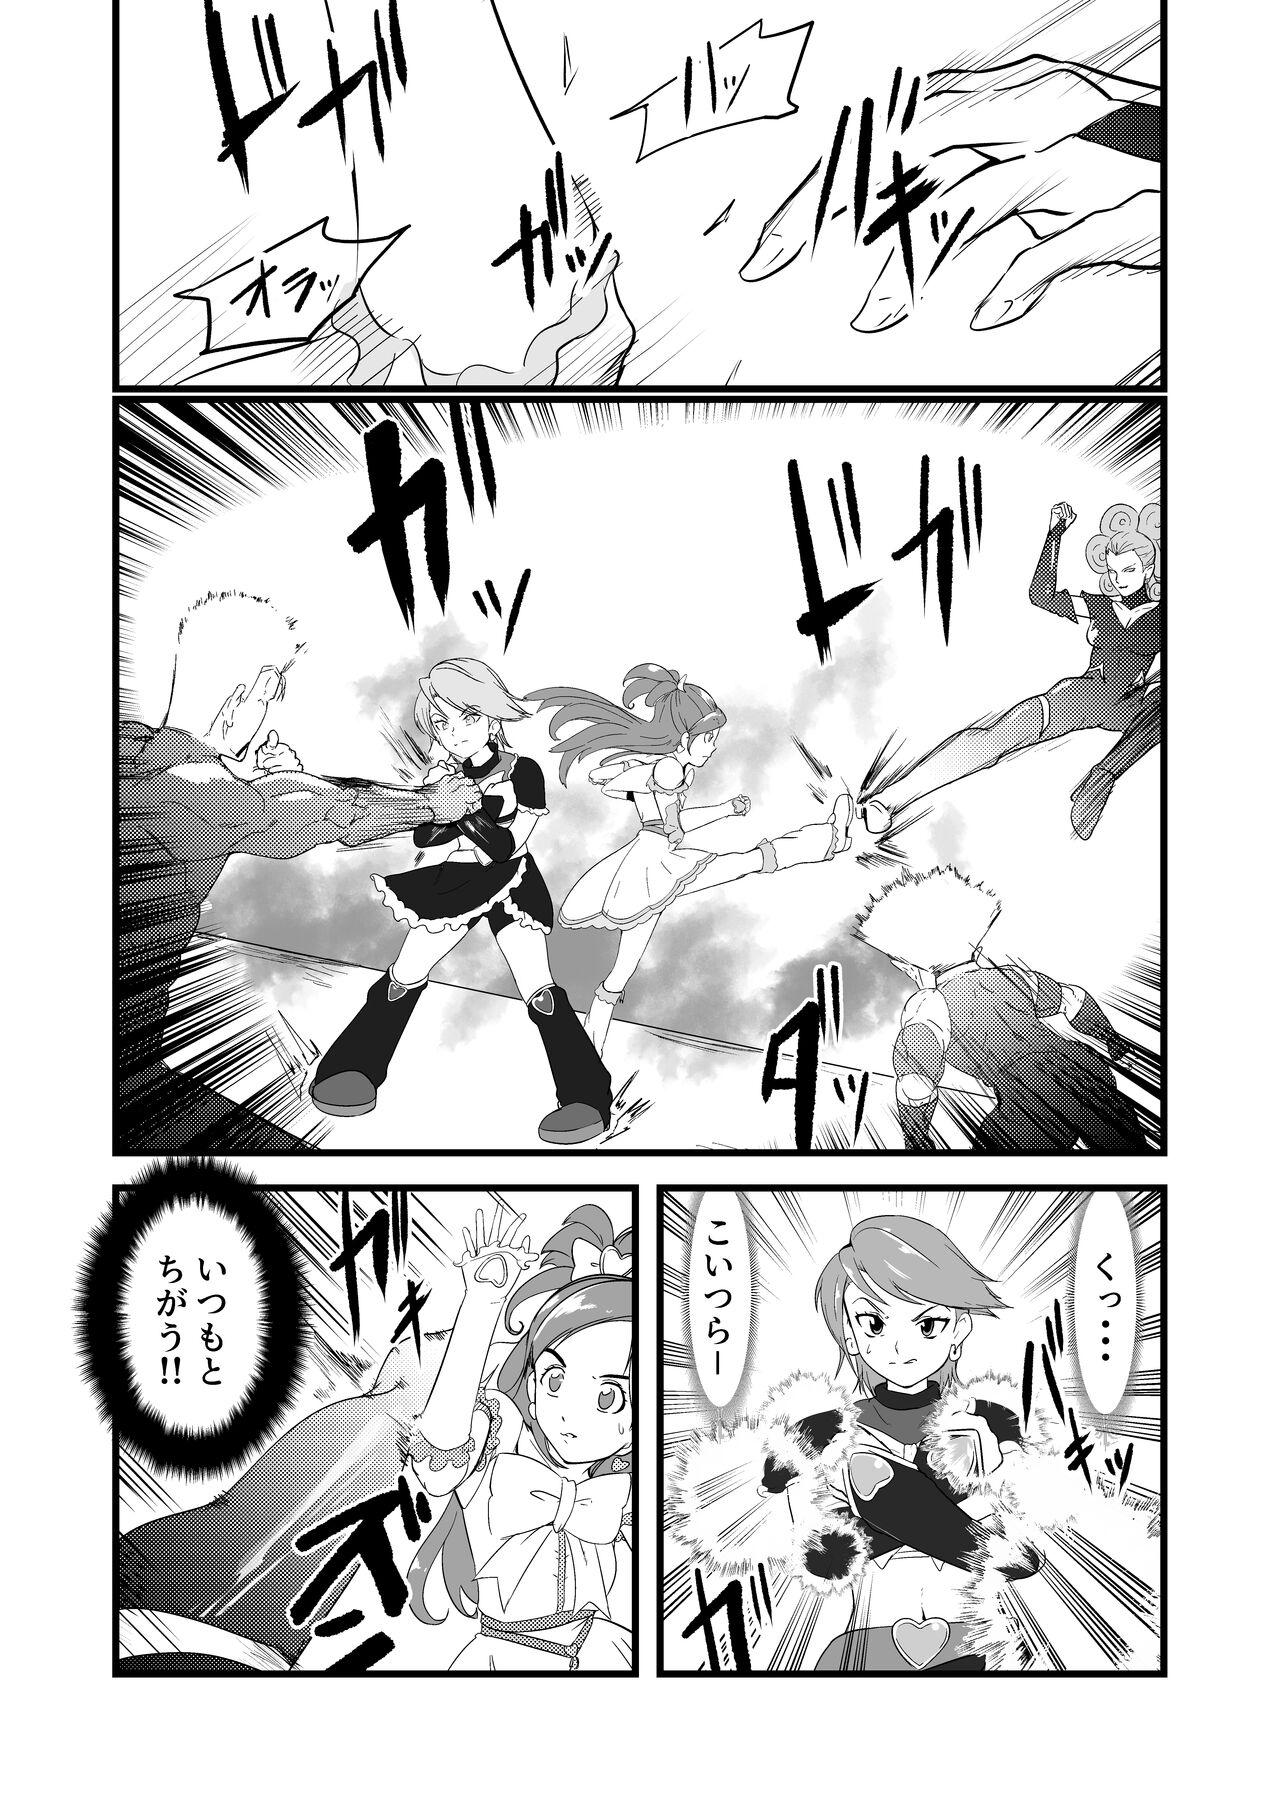 Gemidos Belly Crisis 7 - Pretty cure Exposed - Page 1